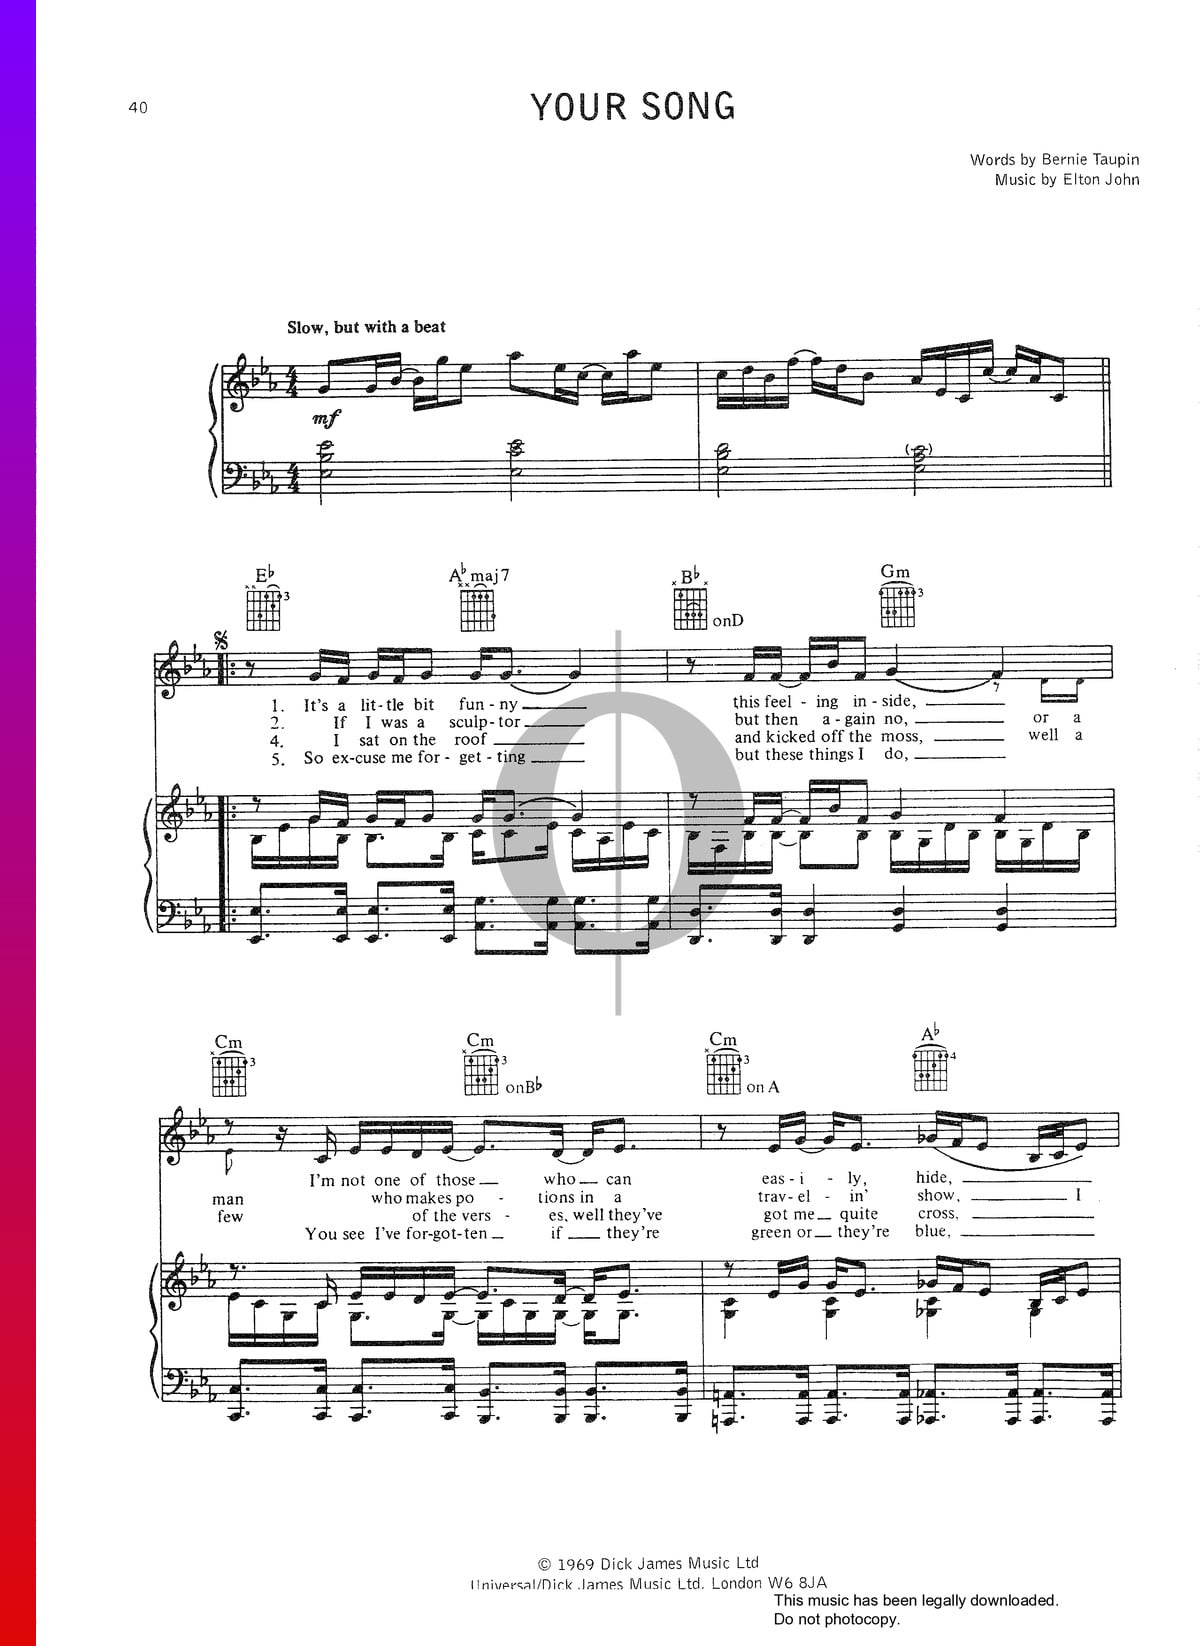 Your Song Sheet Music Piano Voice Guitar Pdf Download Streaming Oktav